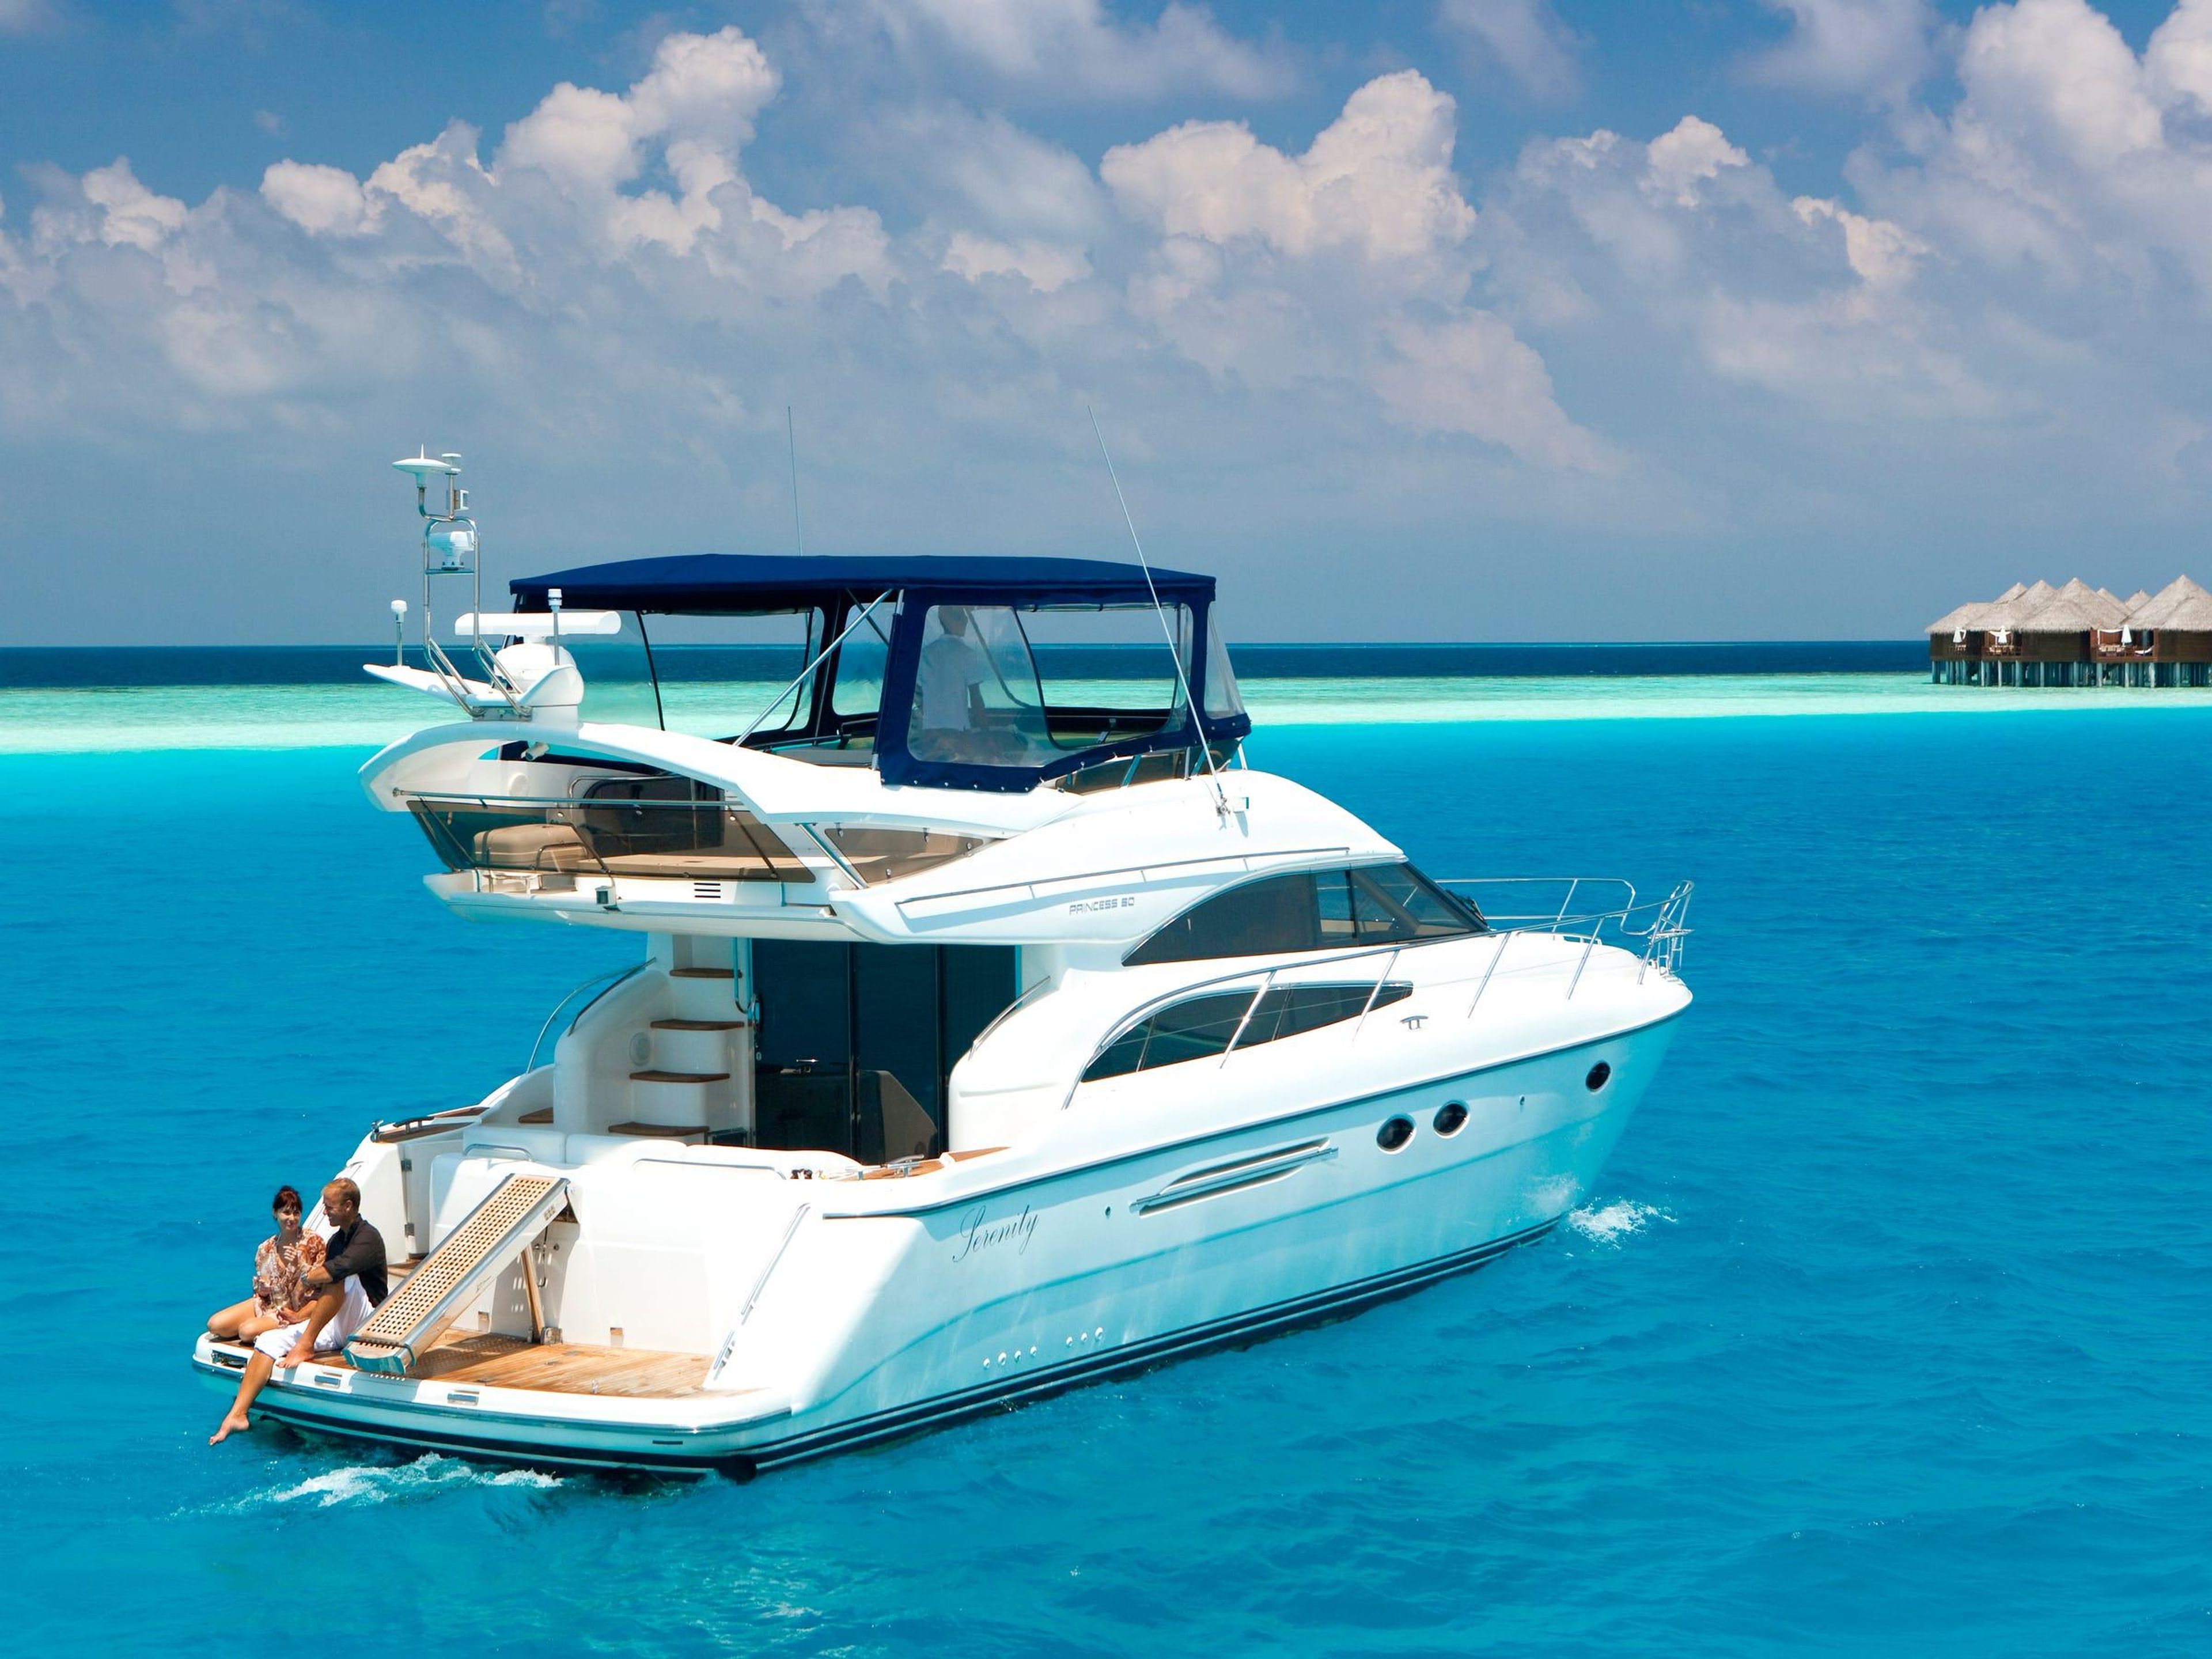 Resort guests can embark on various boat excursions, from a cruise on the resort's yacht, Serenity ...